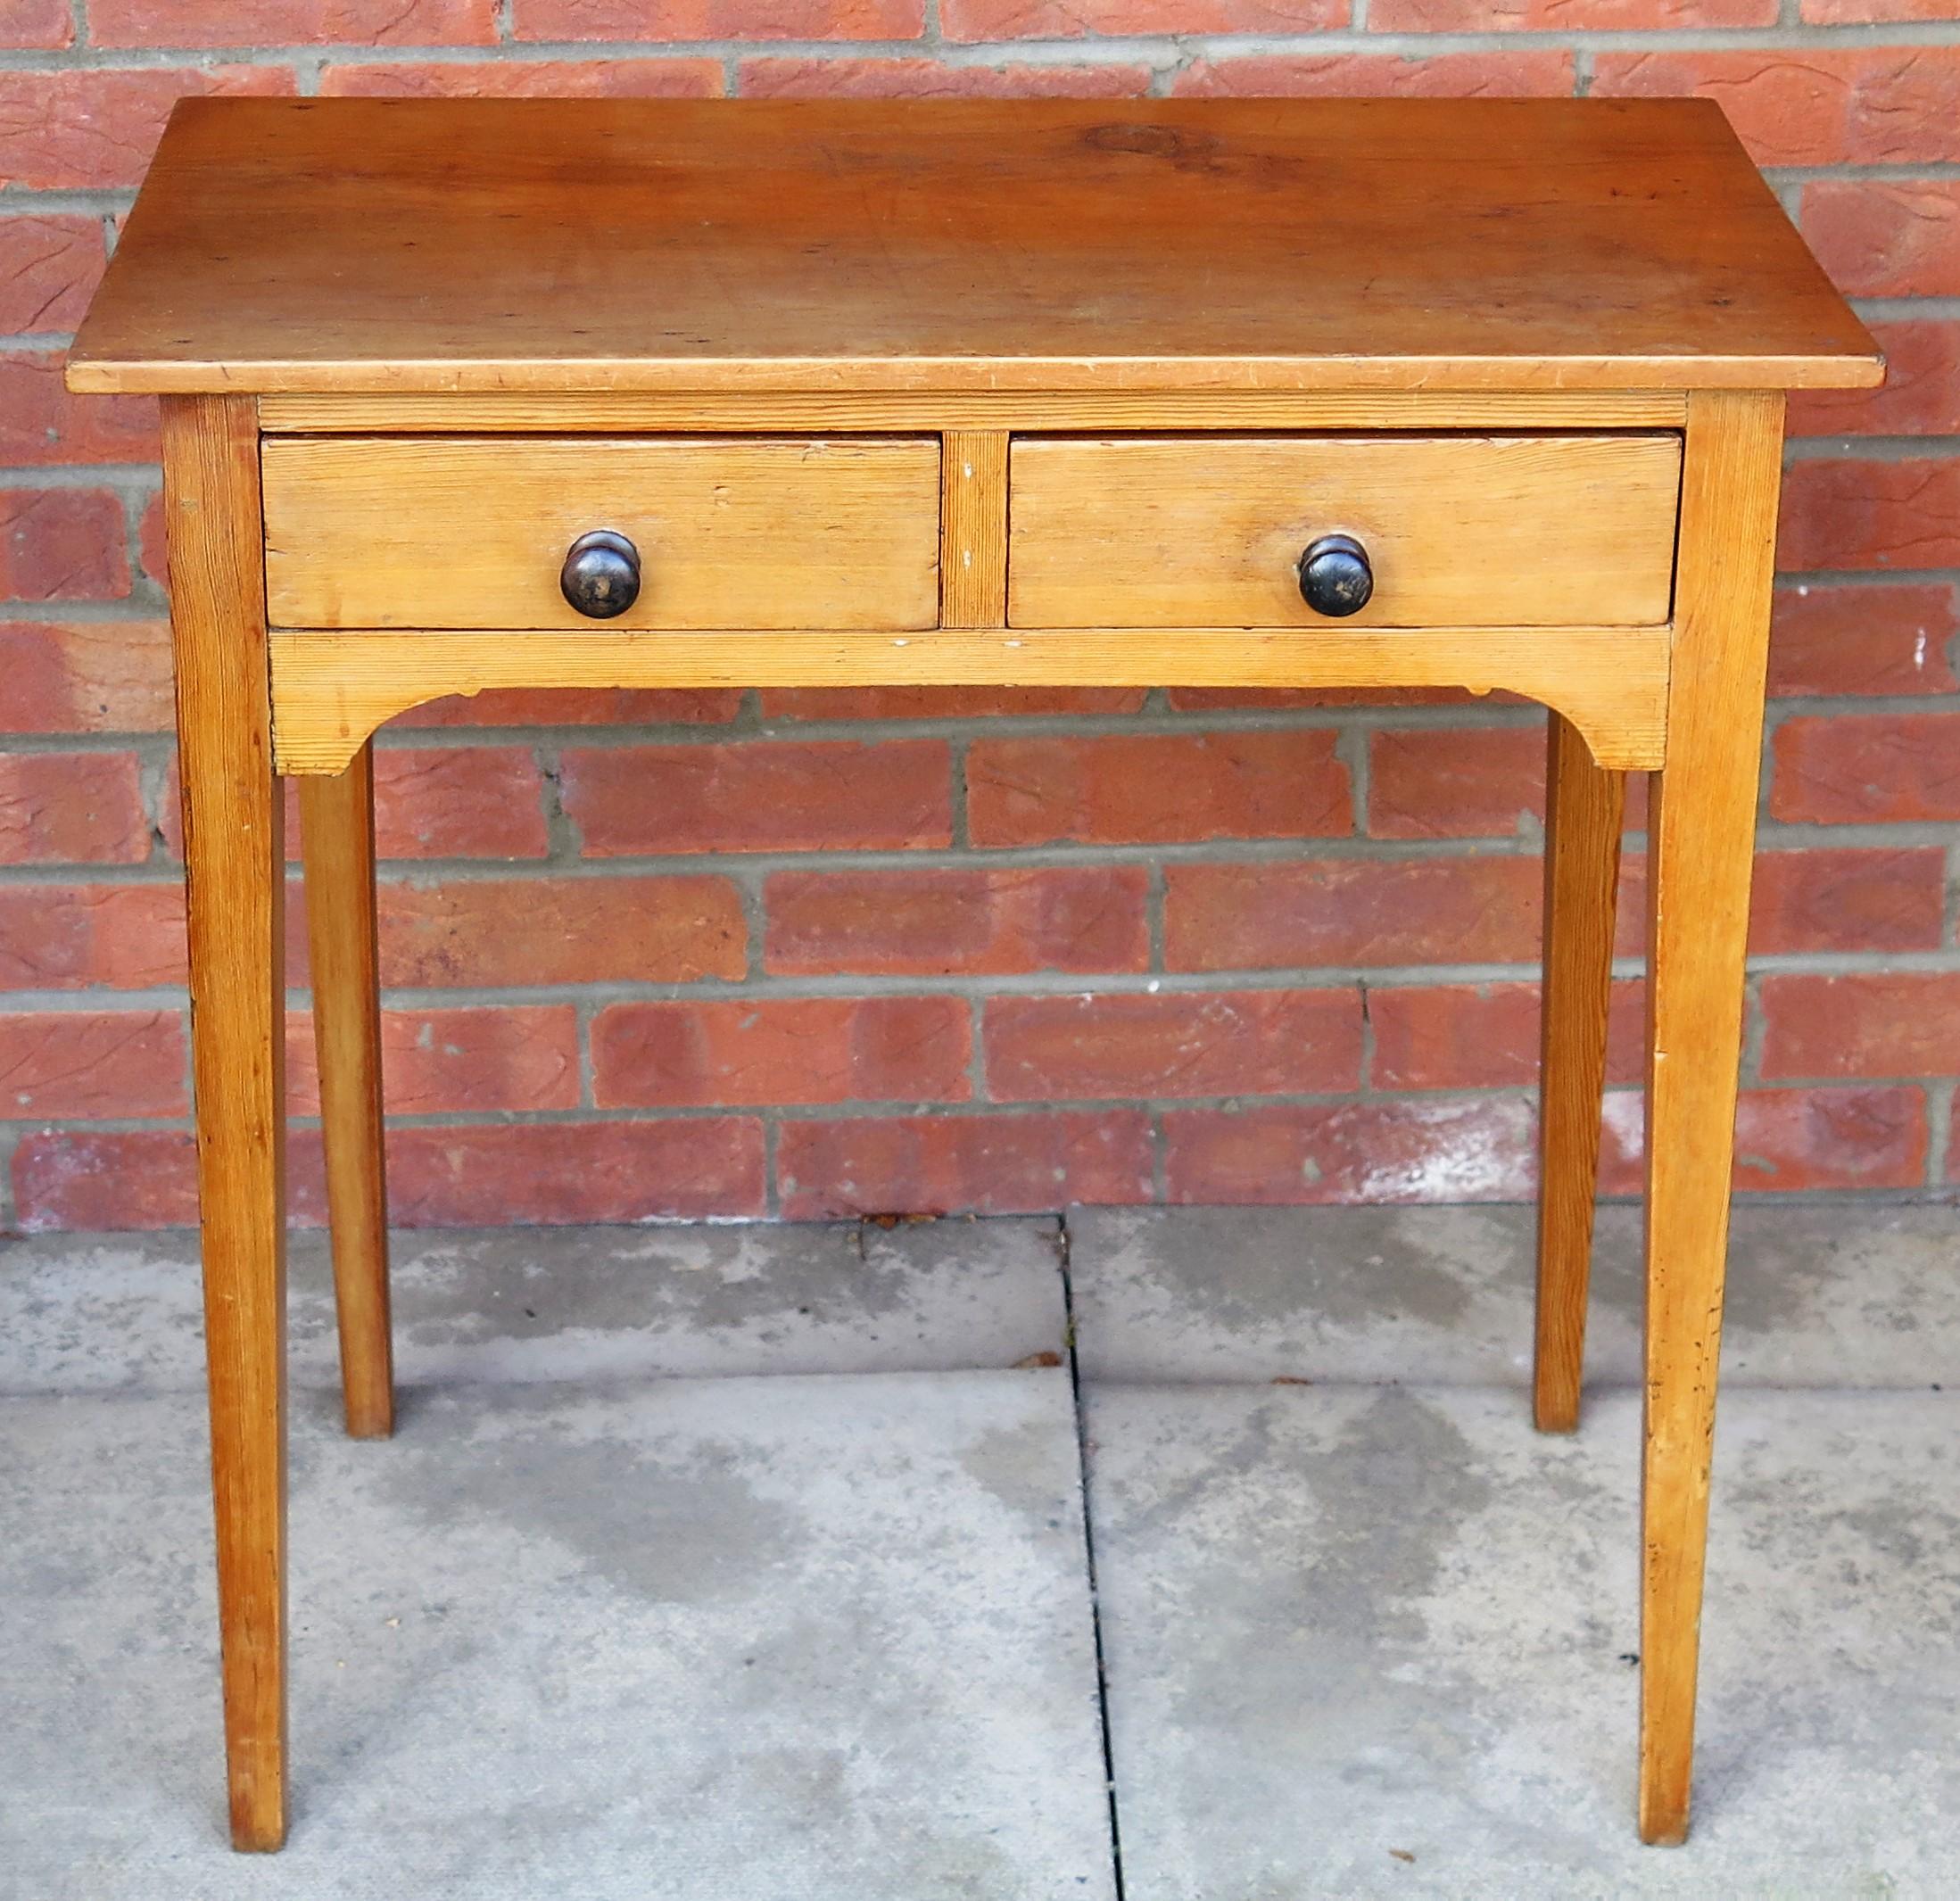 This is a well made solid pine side table with two drawers, dating to the English George III period of the late 18th century, circa 1790.

This is a lovely Georgian piece of English country furniture with great small proportions

The one piece top